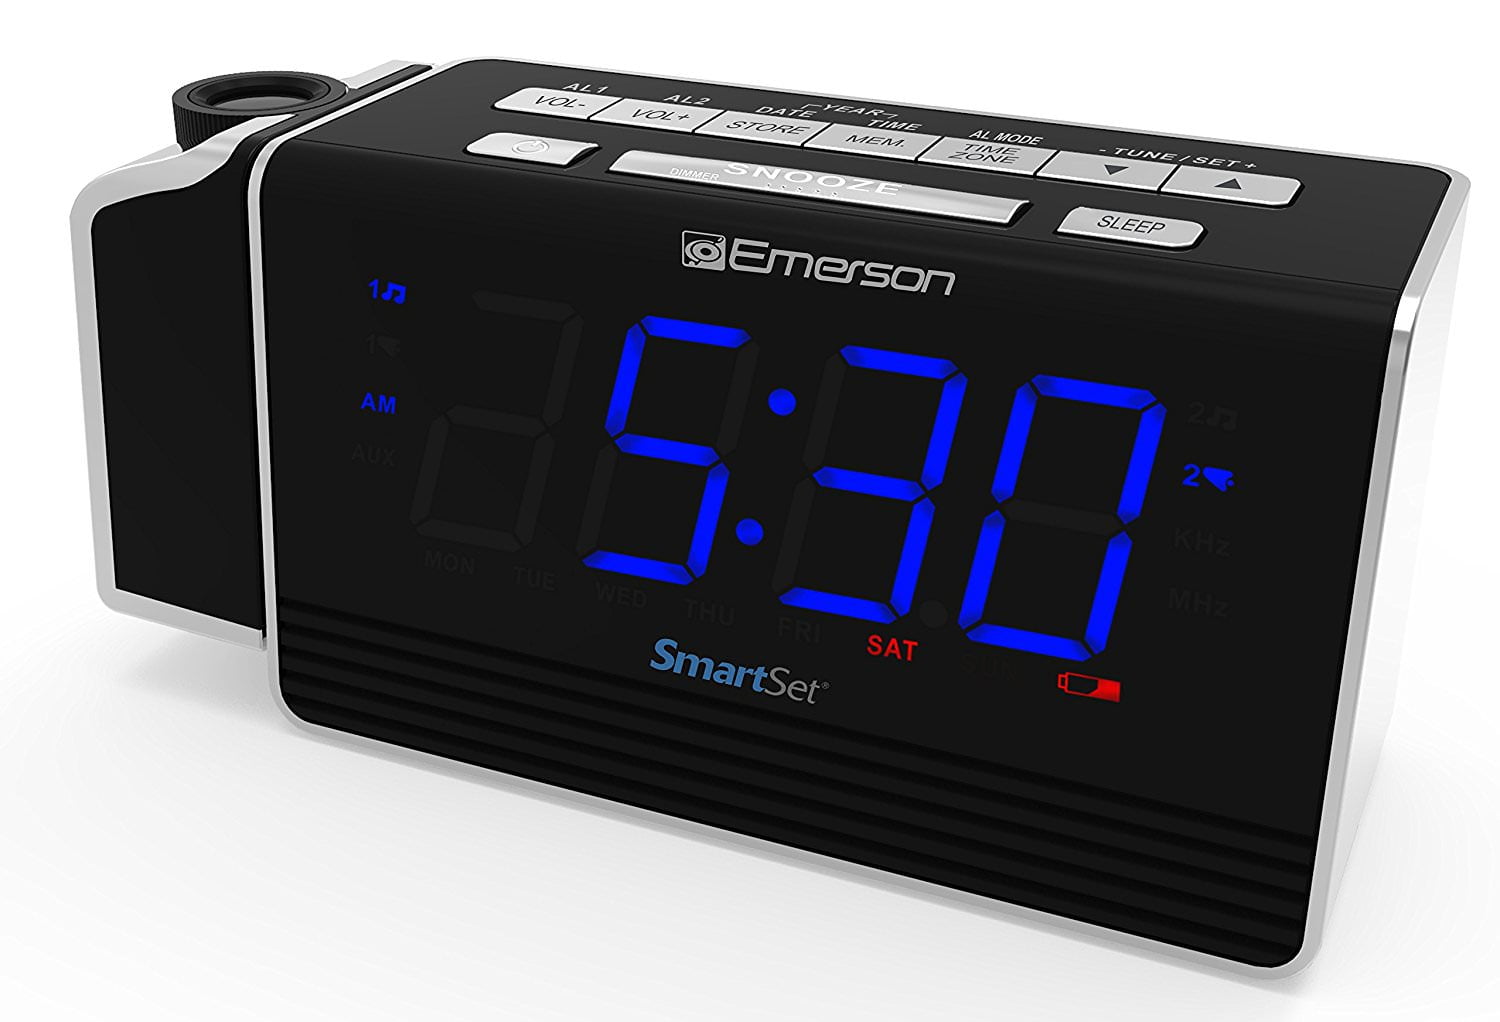 Emerson Smartset Projection Alarm Clock Radio With Usb Charging For Iphone Ipad Ipod Android And Tablets Digital Fm Radio 1 4 Blue Led Display 4 Level Dimmer Er Walmart Com Walmart Com